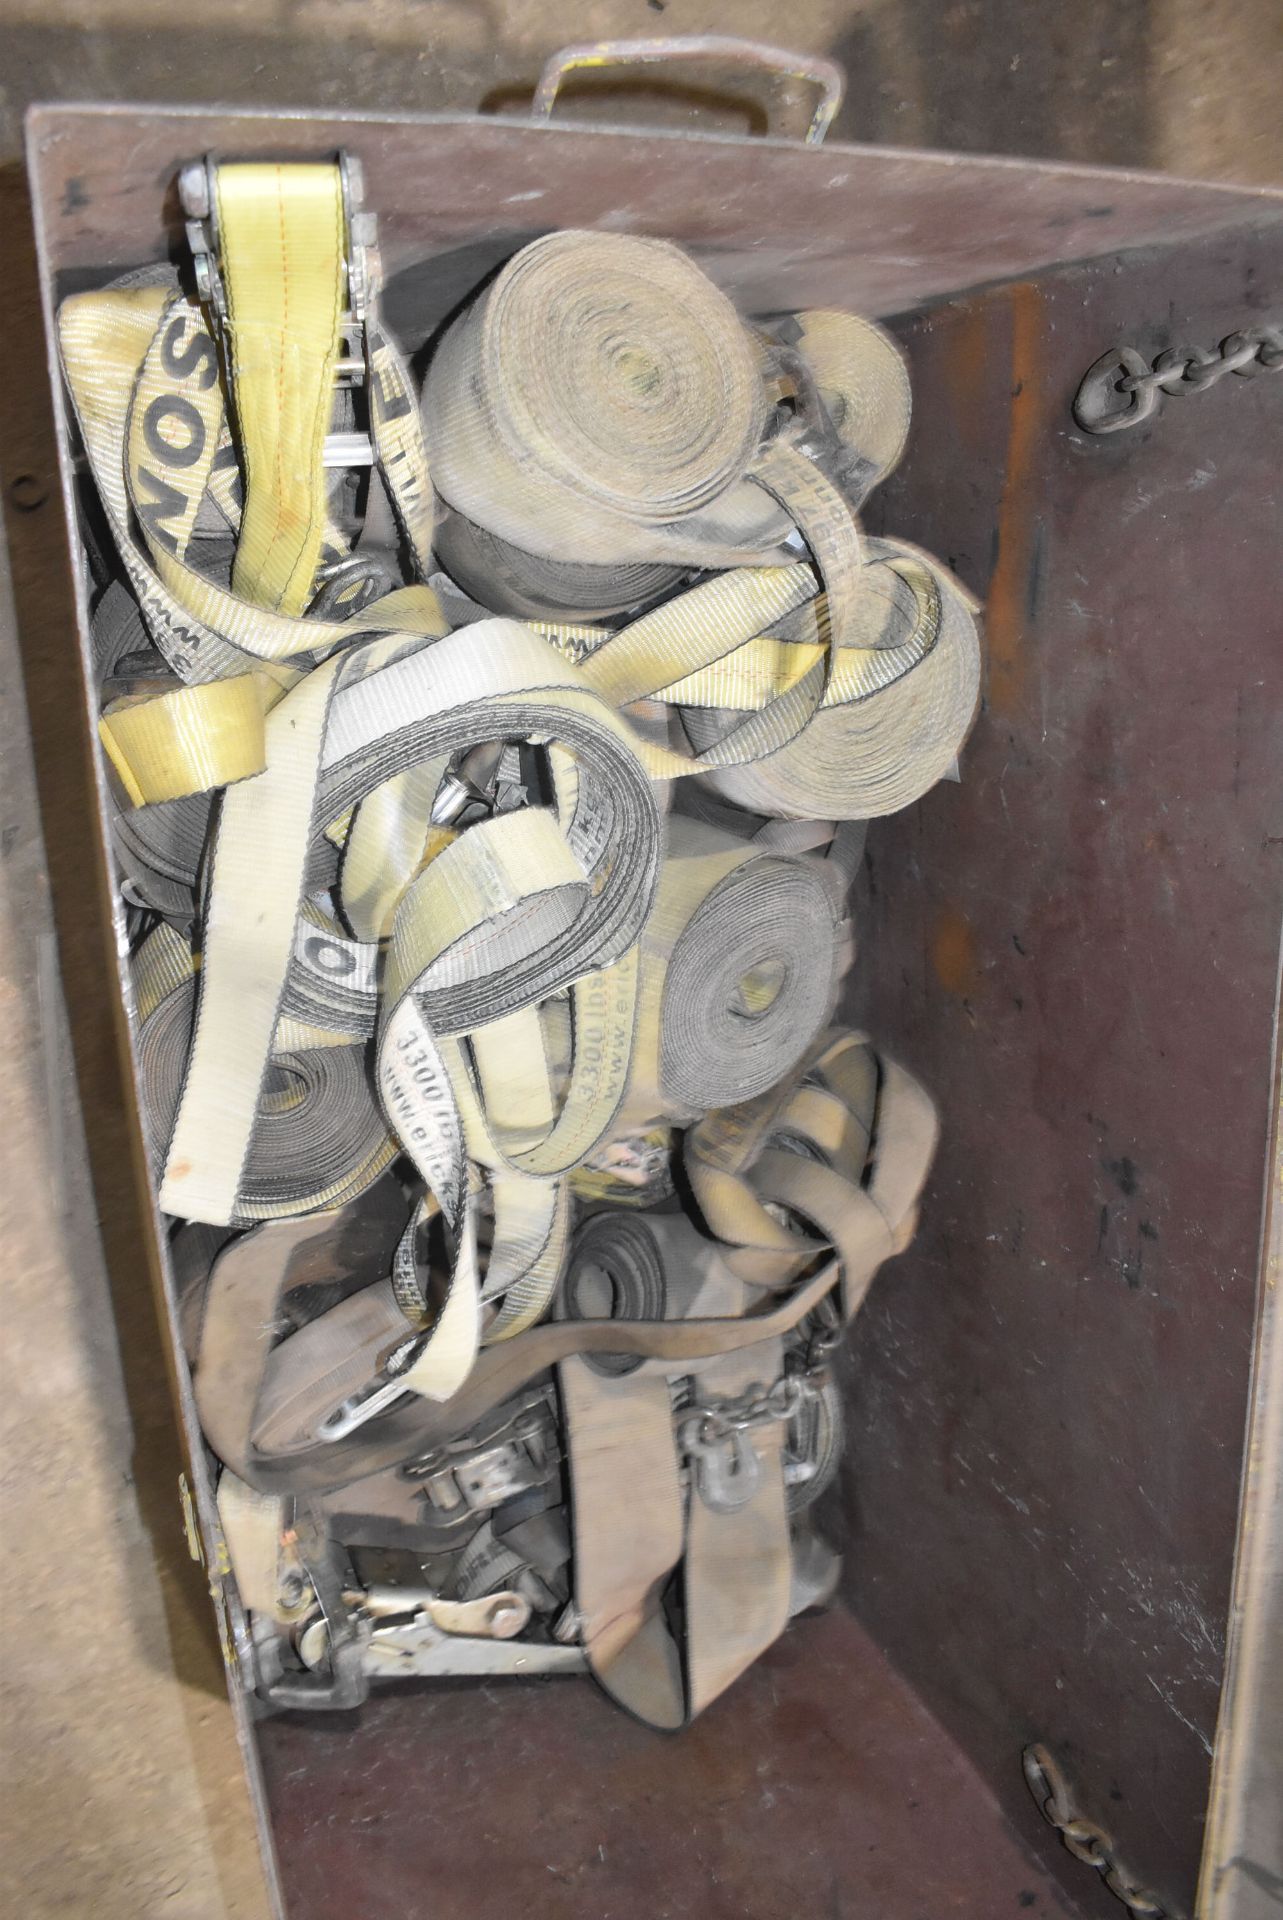 LOT/ JOB BOX WITH TIE-DOWN STRAPS [RIGGING FEES FOR LOT #942 - $30 USD PLUS APPLICABLE TAXES] - Image 3 of 3